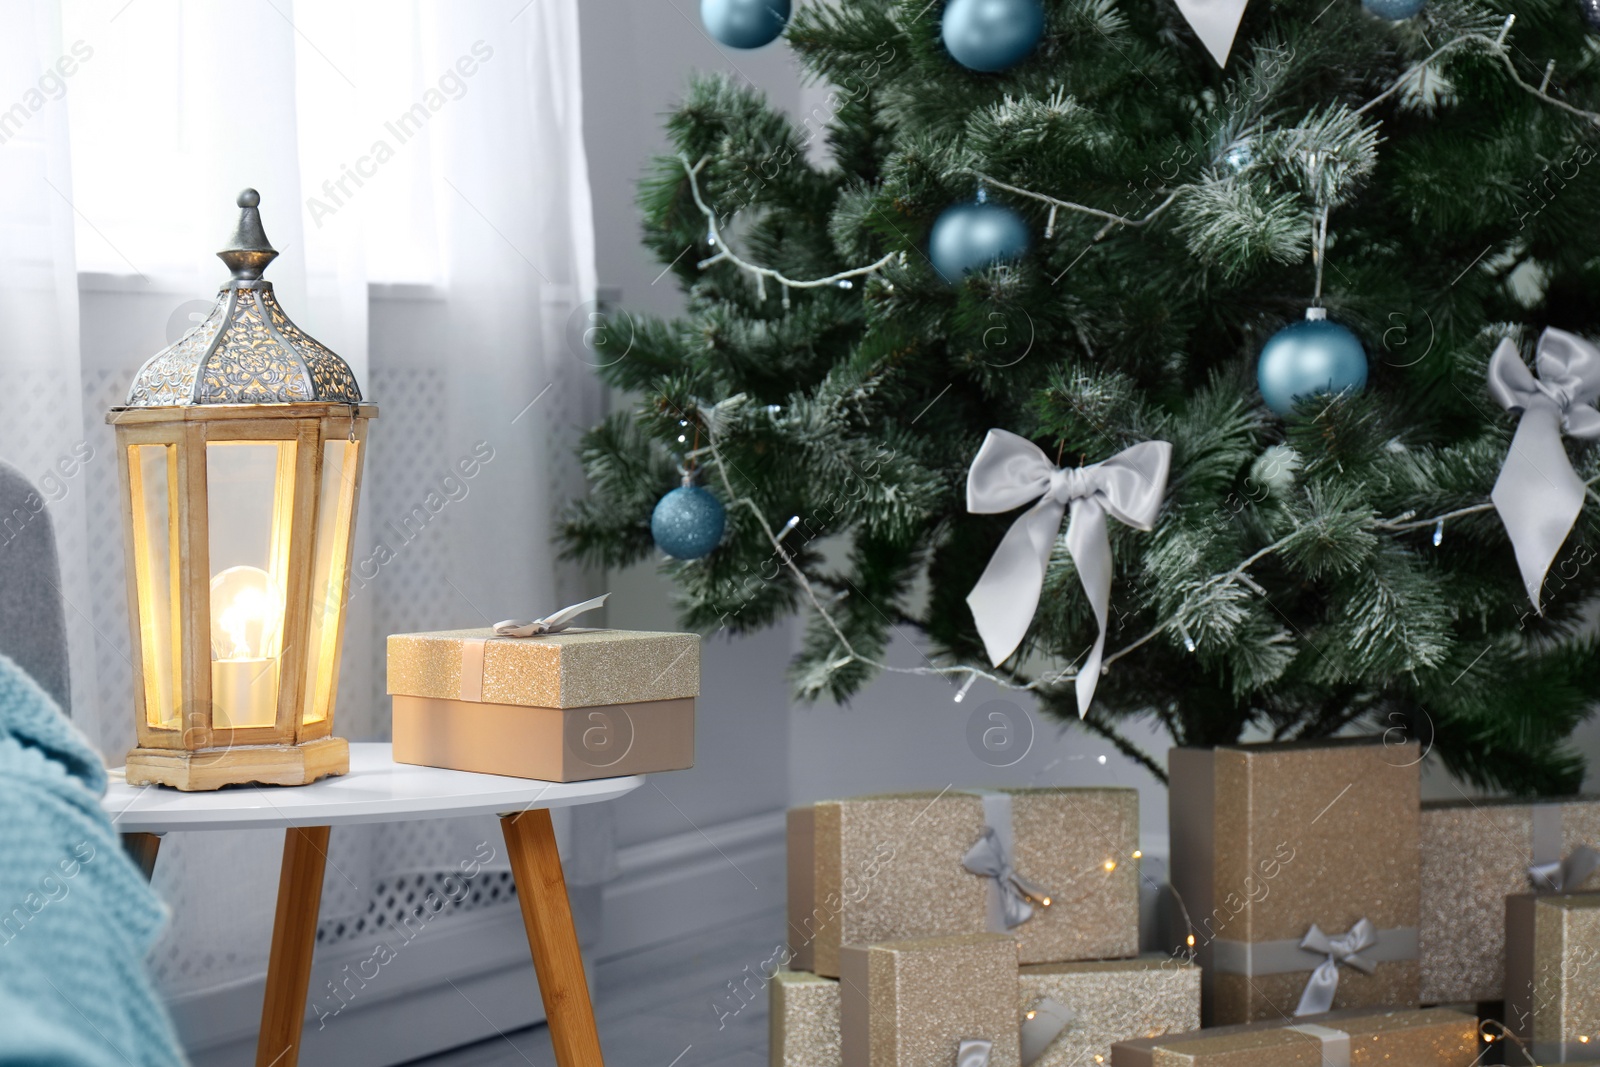 Photo of Decorative lantern on table and Christmas tree with gift boxes in stylish living room interior